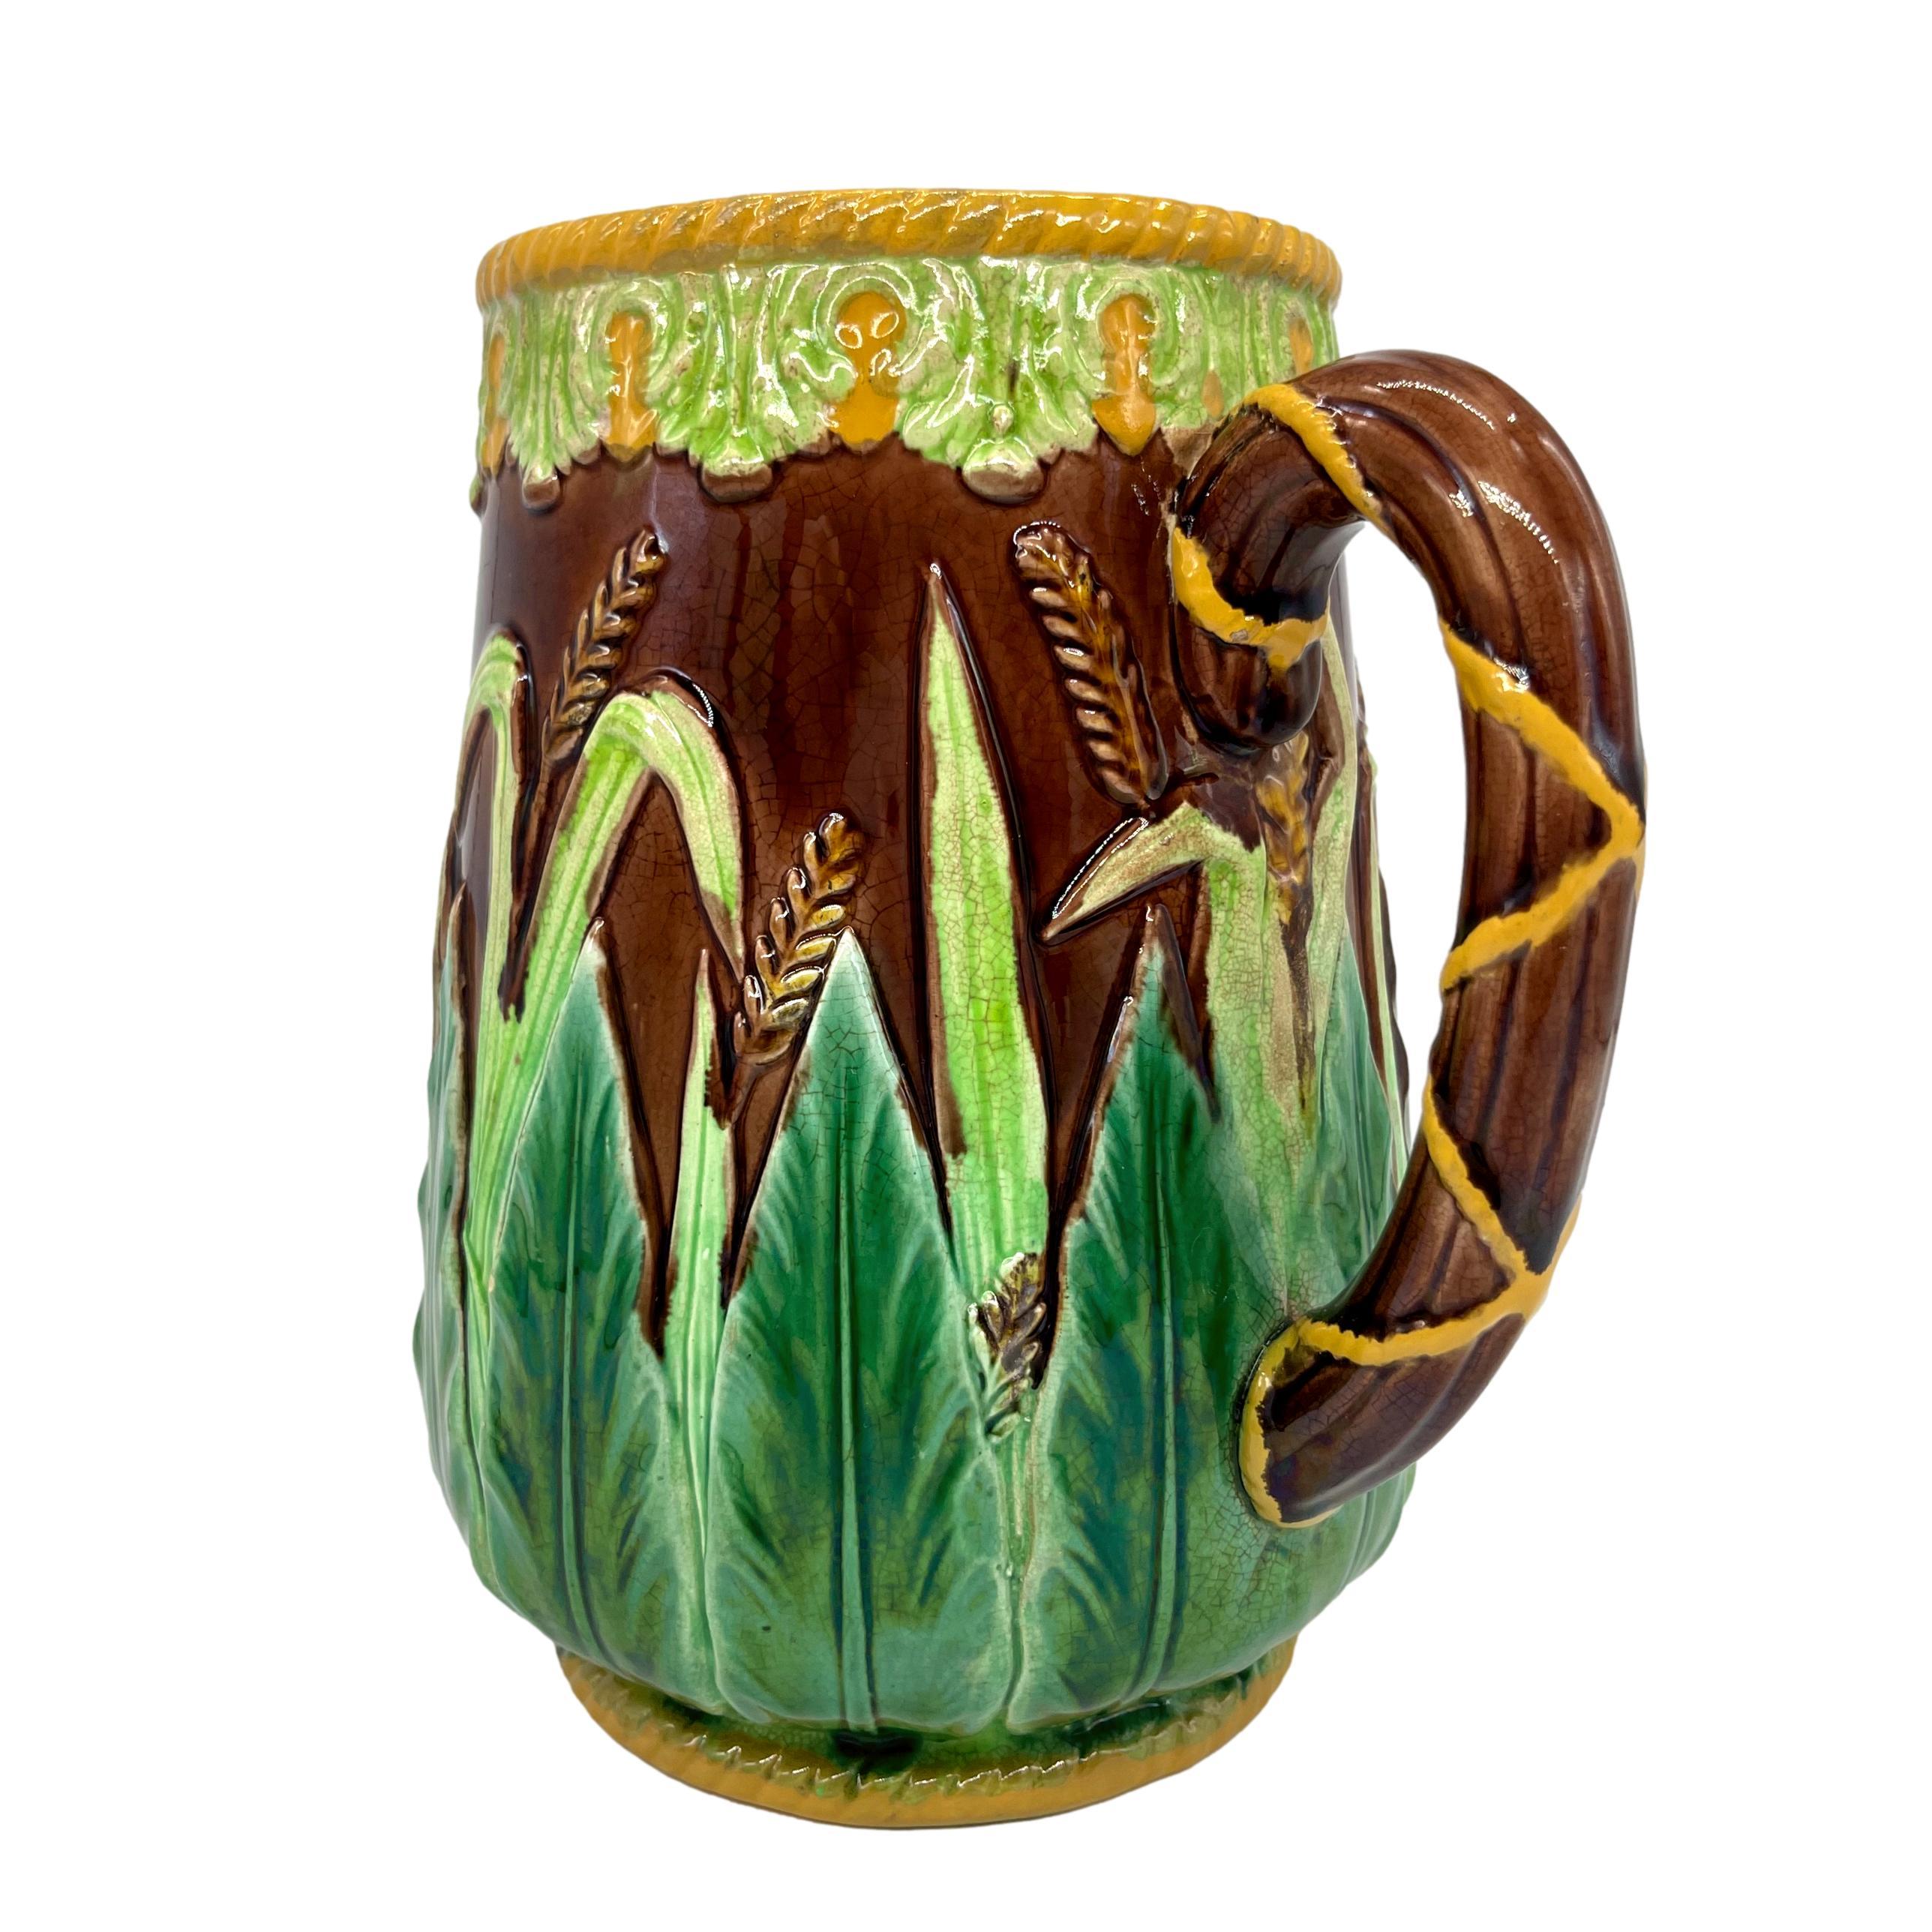 George Jones Majolica Wheat Pitcher with Green Acanthus Leaves, Ca. 1875 For Sale 2